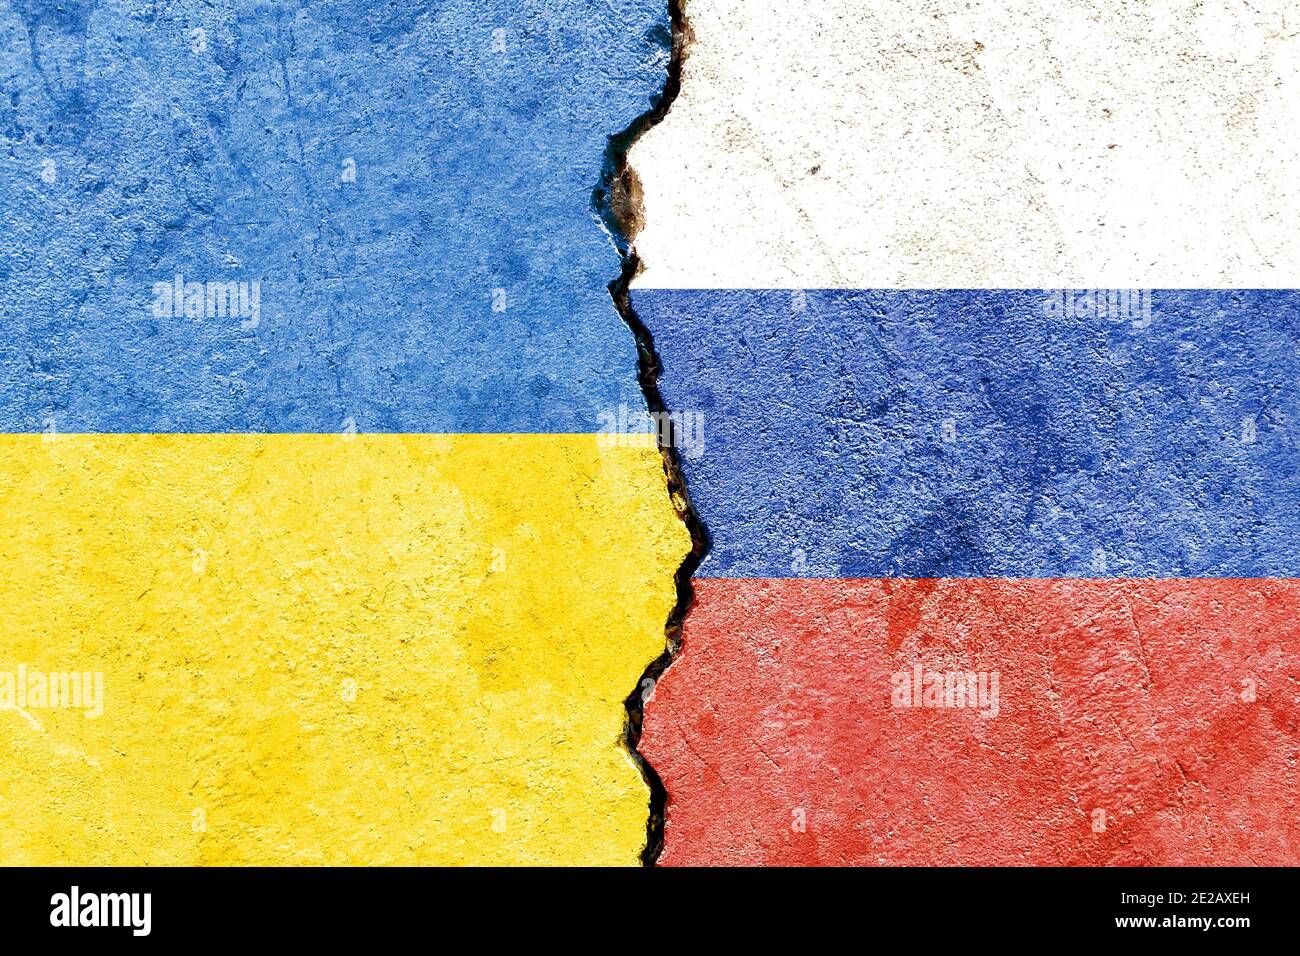 View of Ukraine vs Russia flags on cracked concrete wall - political partnership conflicts concept Stock Photo